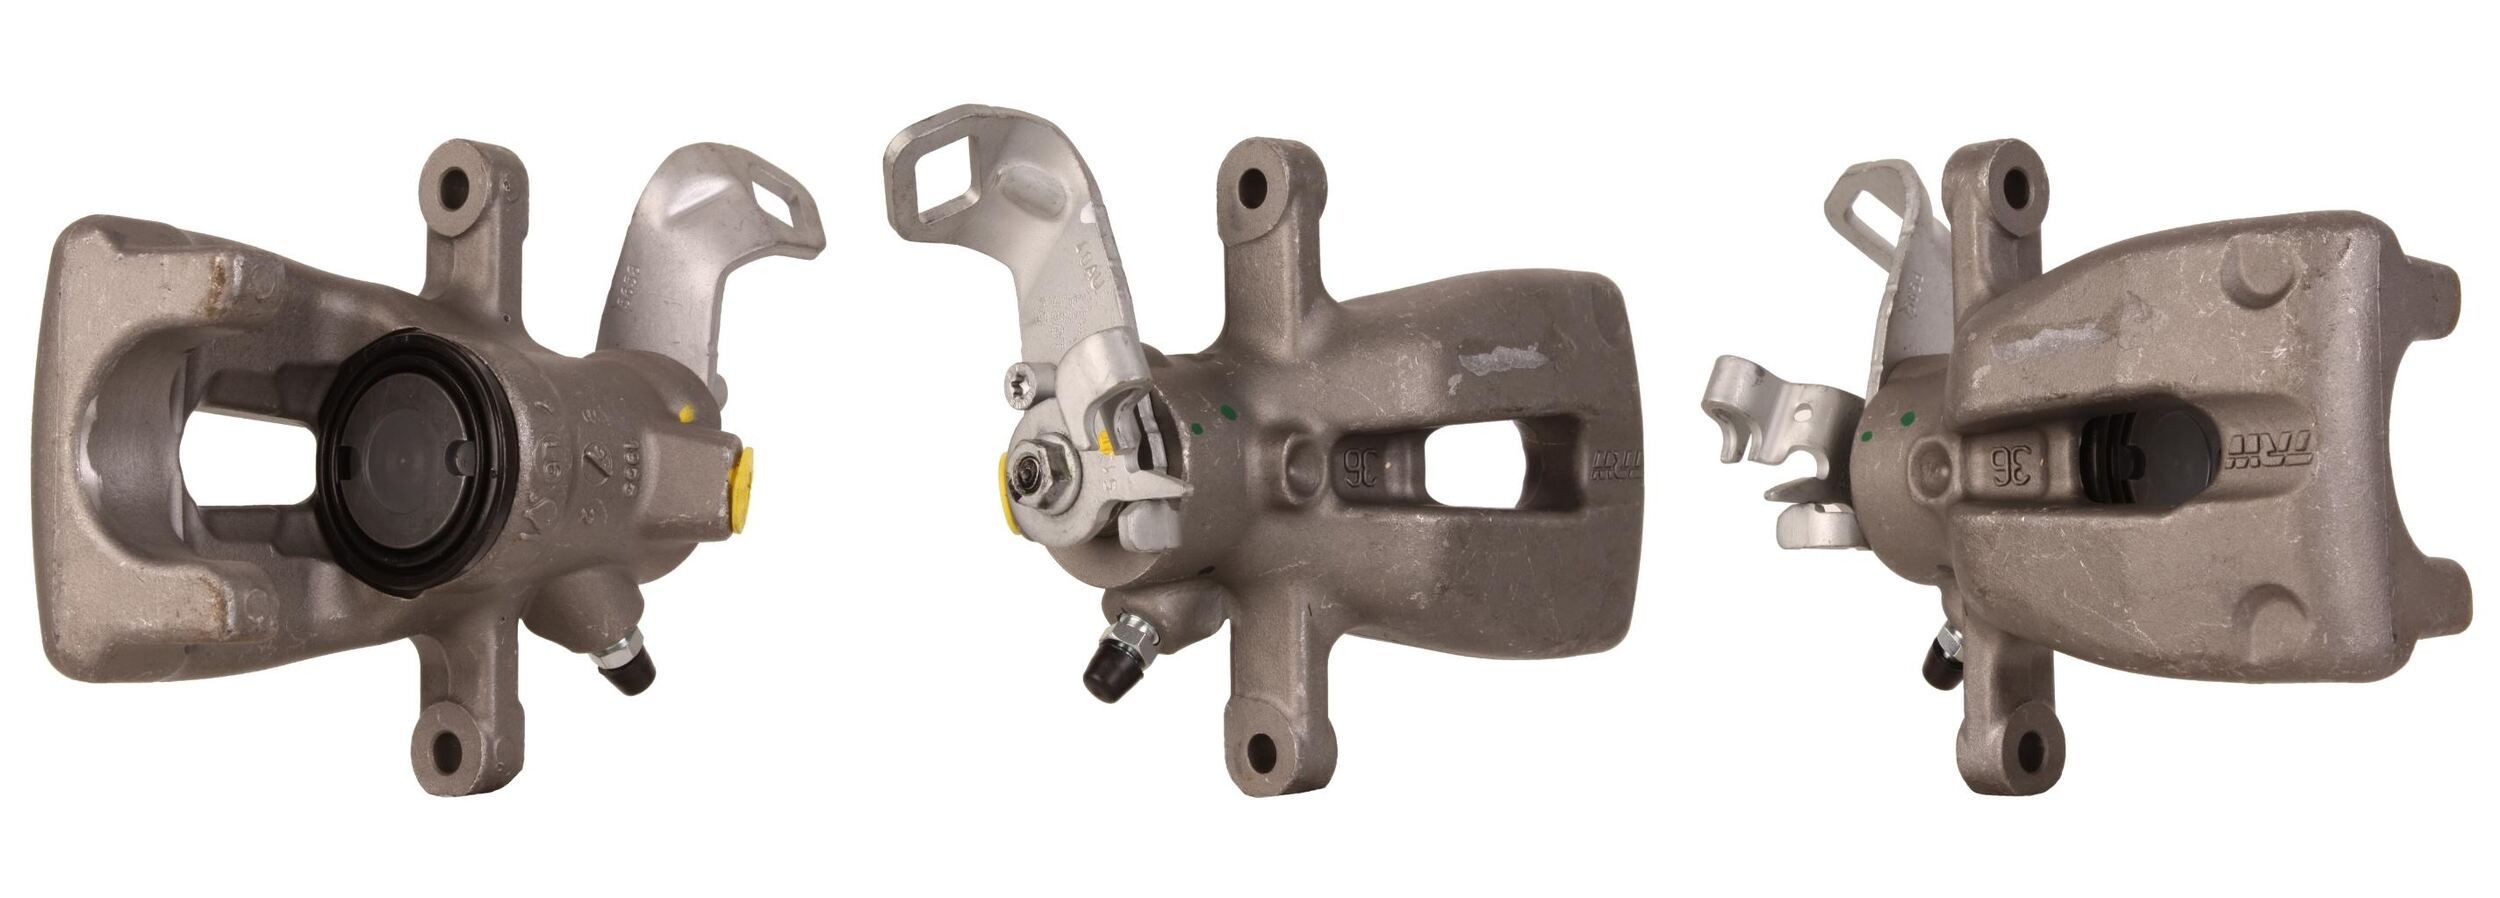 86-2082 ELSTOCK Brake calipers MINI Aluminium, Rear Axle Left, behind the axle, for vehicles without sports package